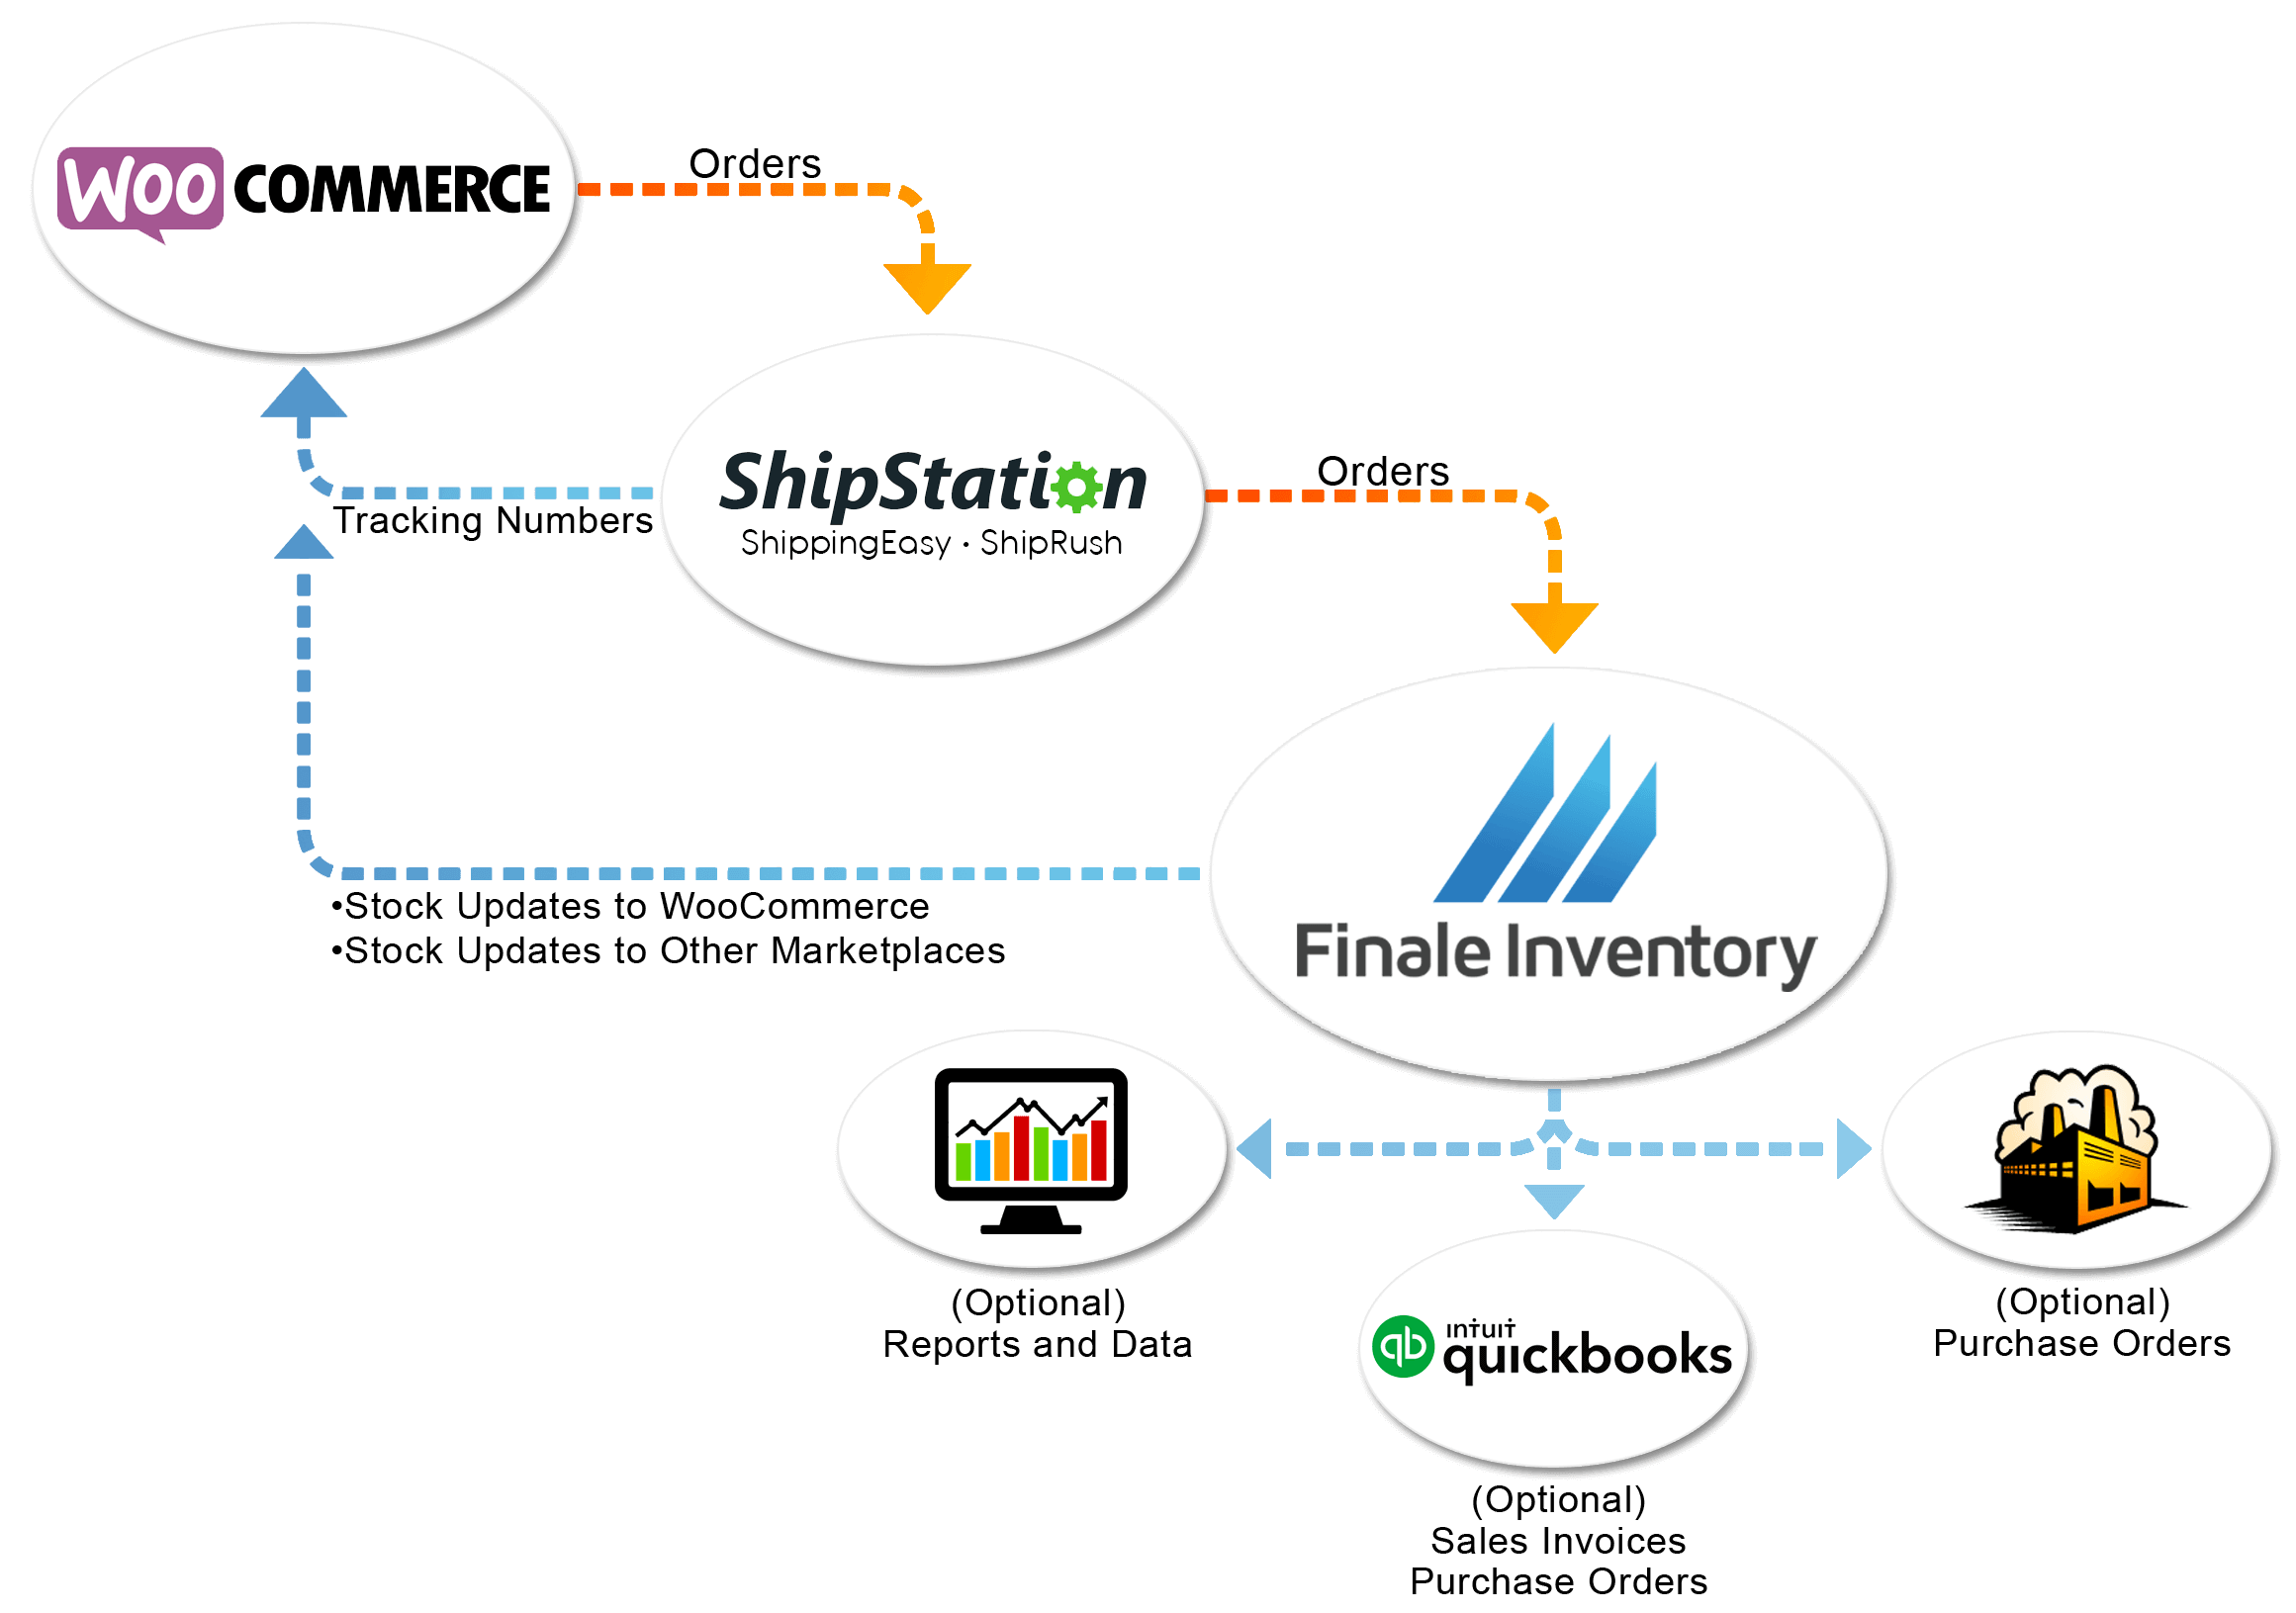 woocommerce integrates with shipstation